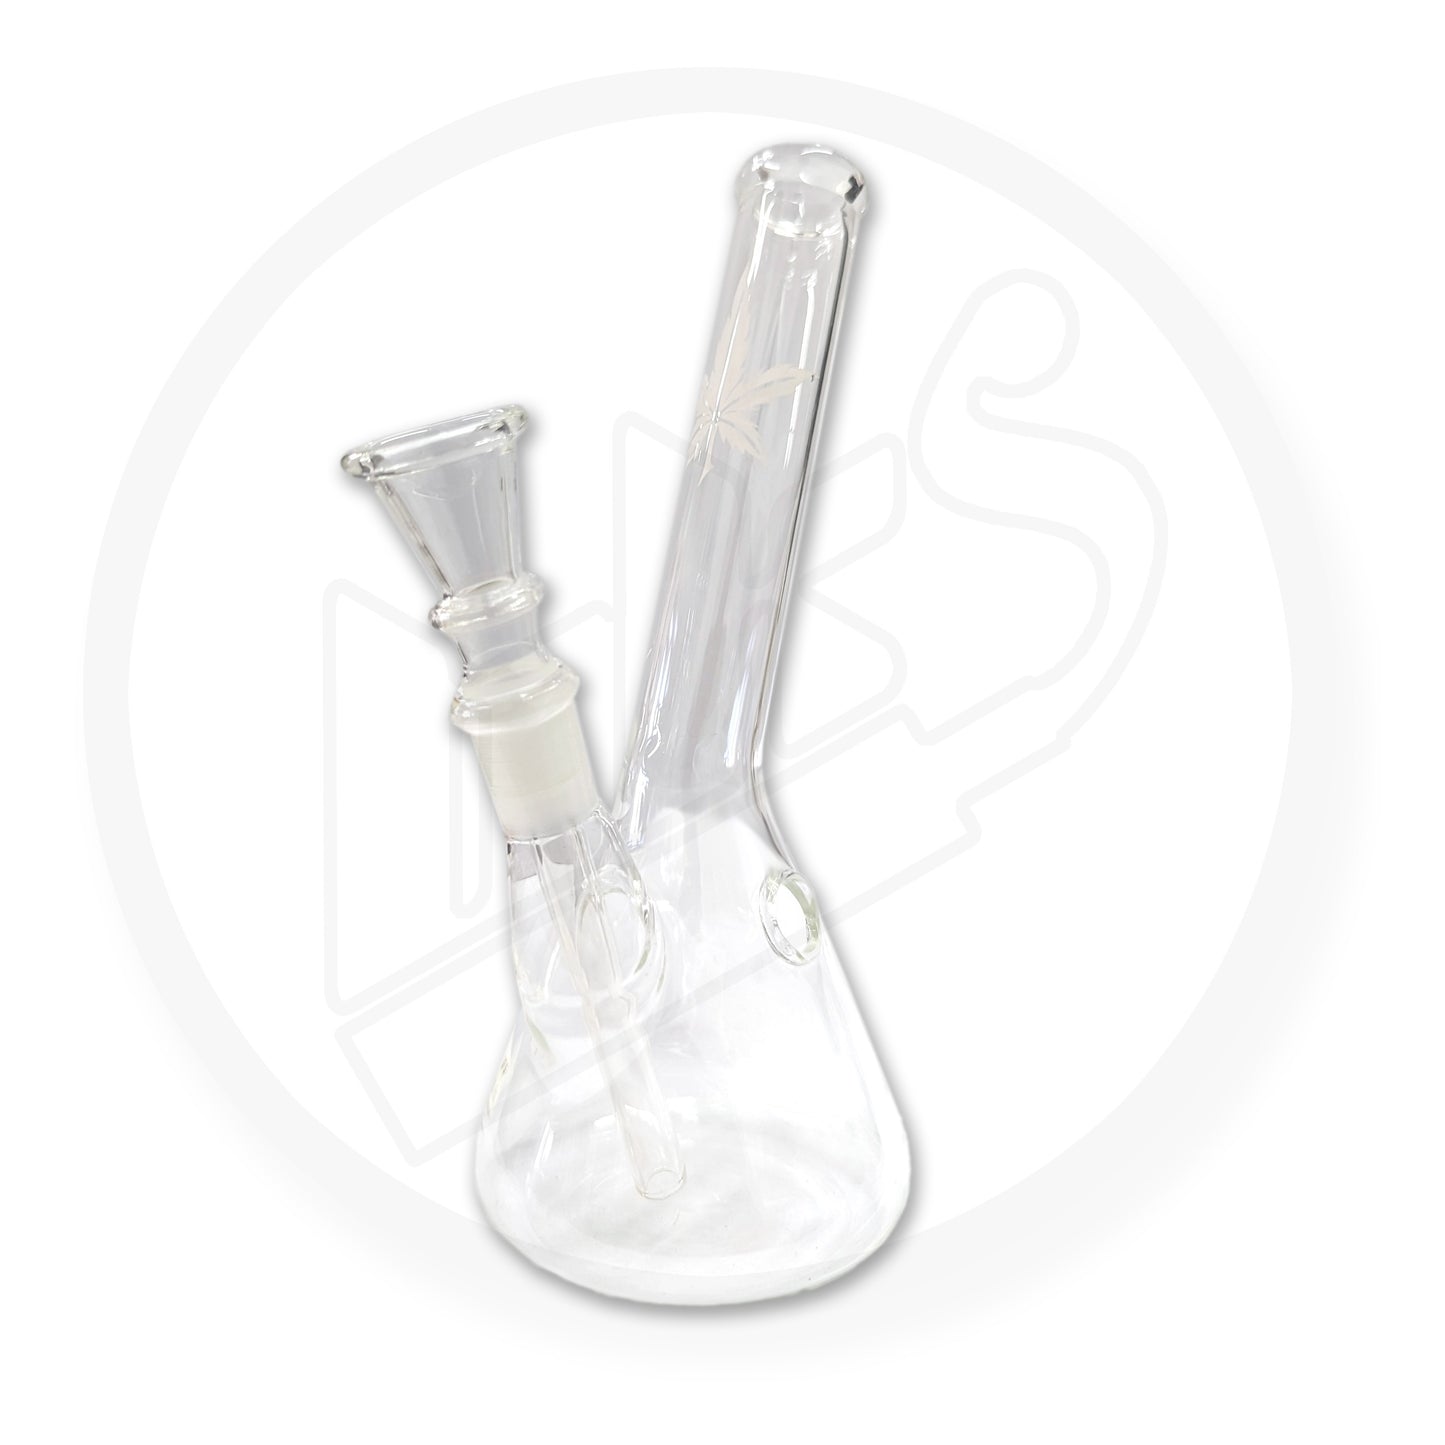 Glass Waterpipe - 20cm, Leaner with Bubble Base, Leaf